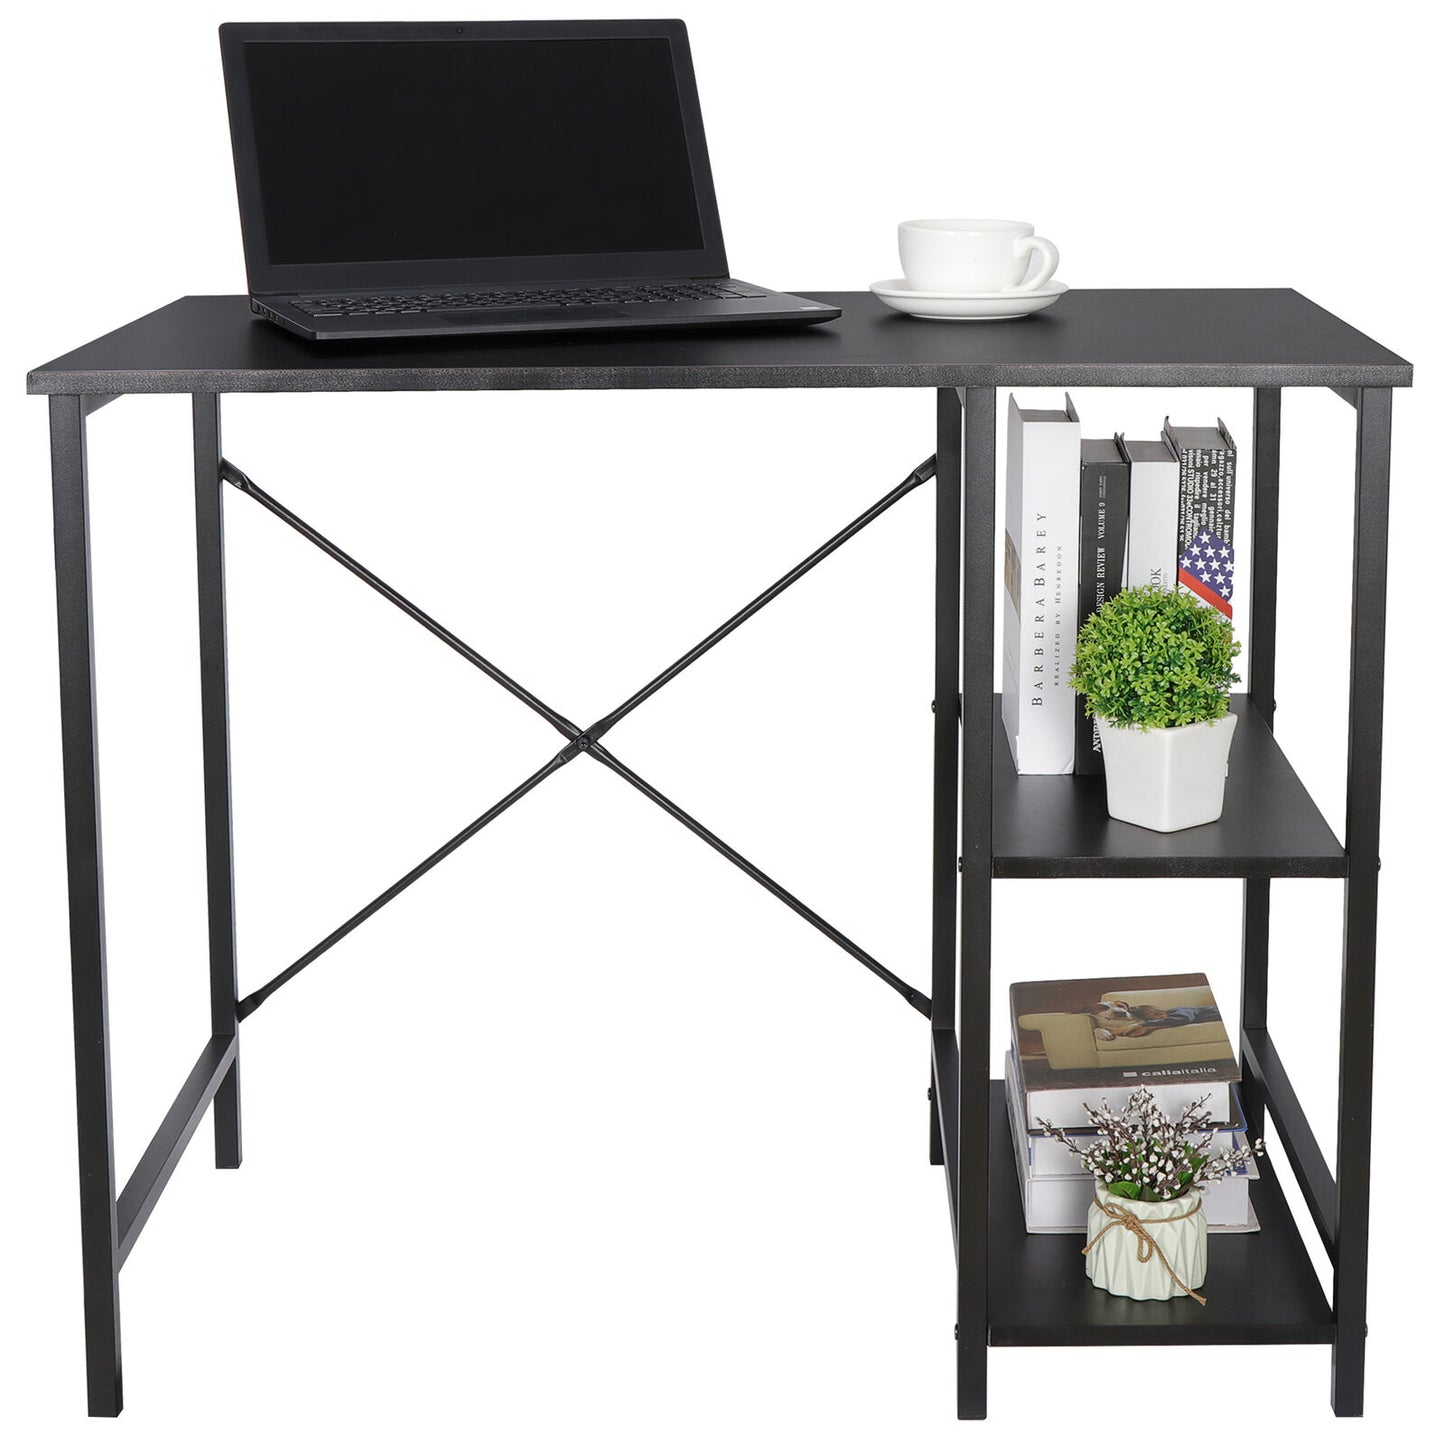 36"Modern Computer Desk Laptop Study Working Writing PC Table with 2 Tier Shelf